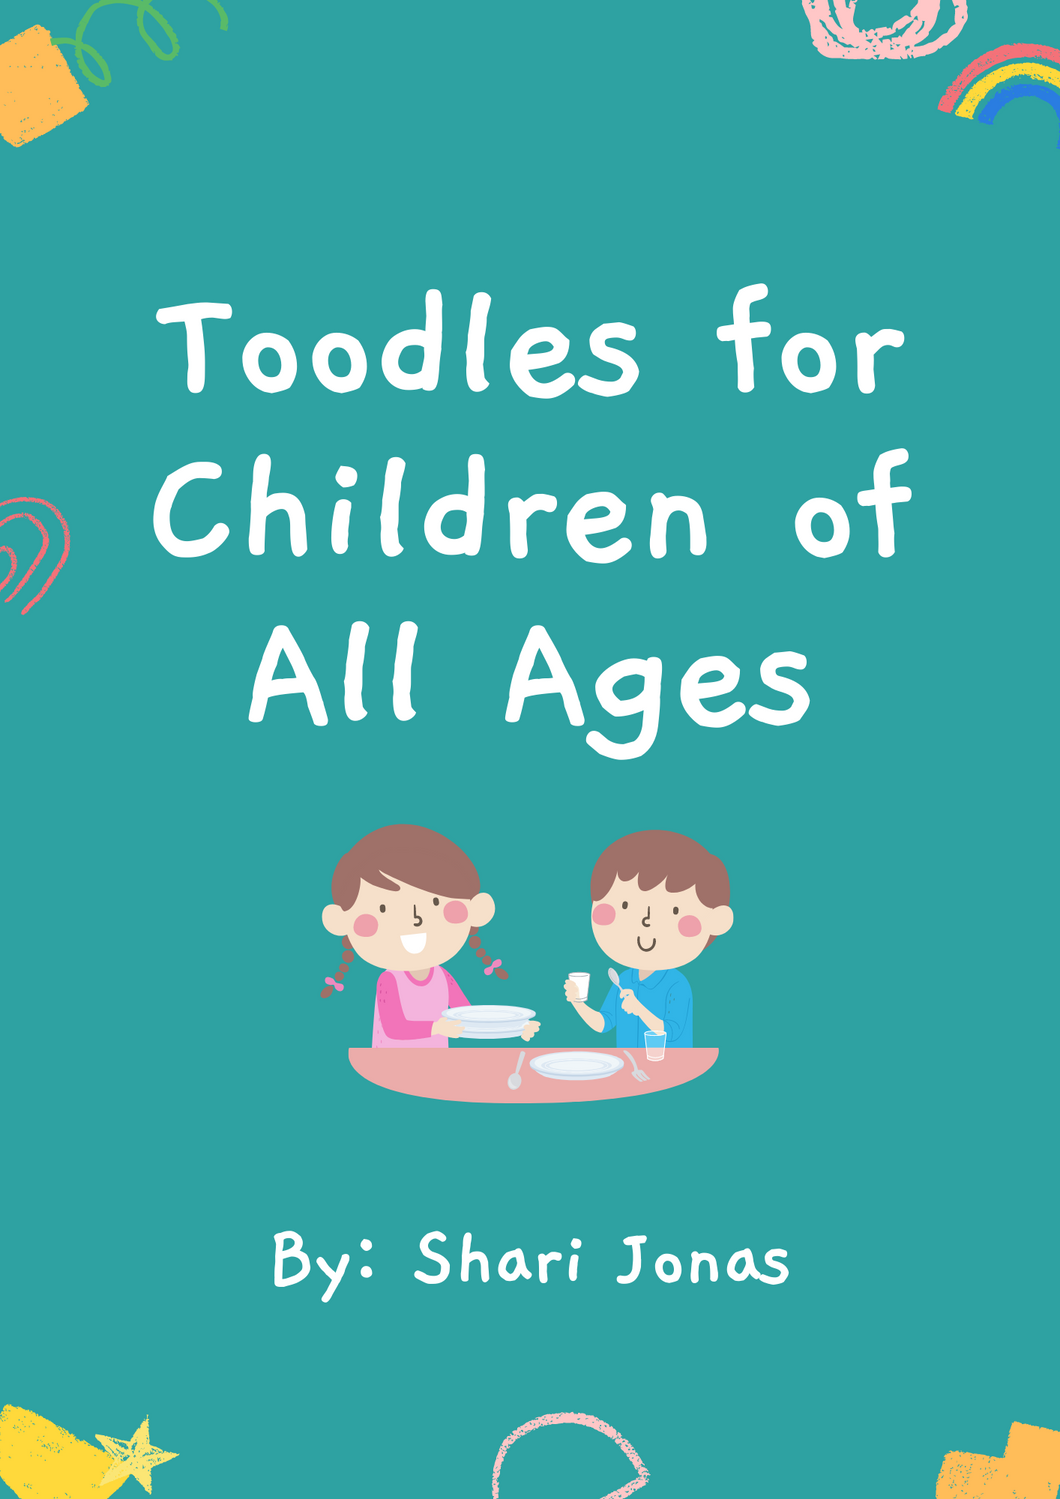 Toodles for Children of All Ages